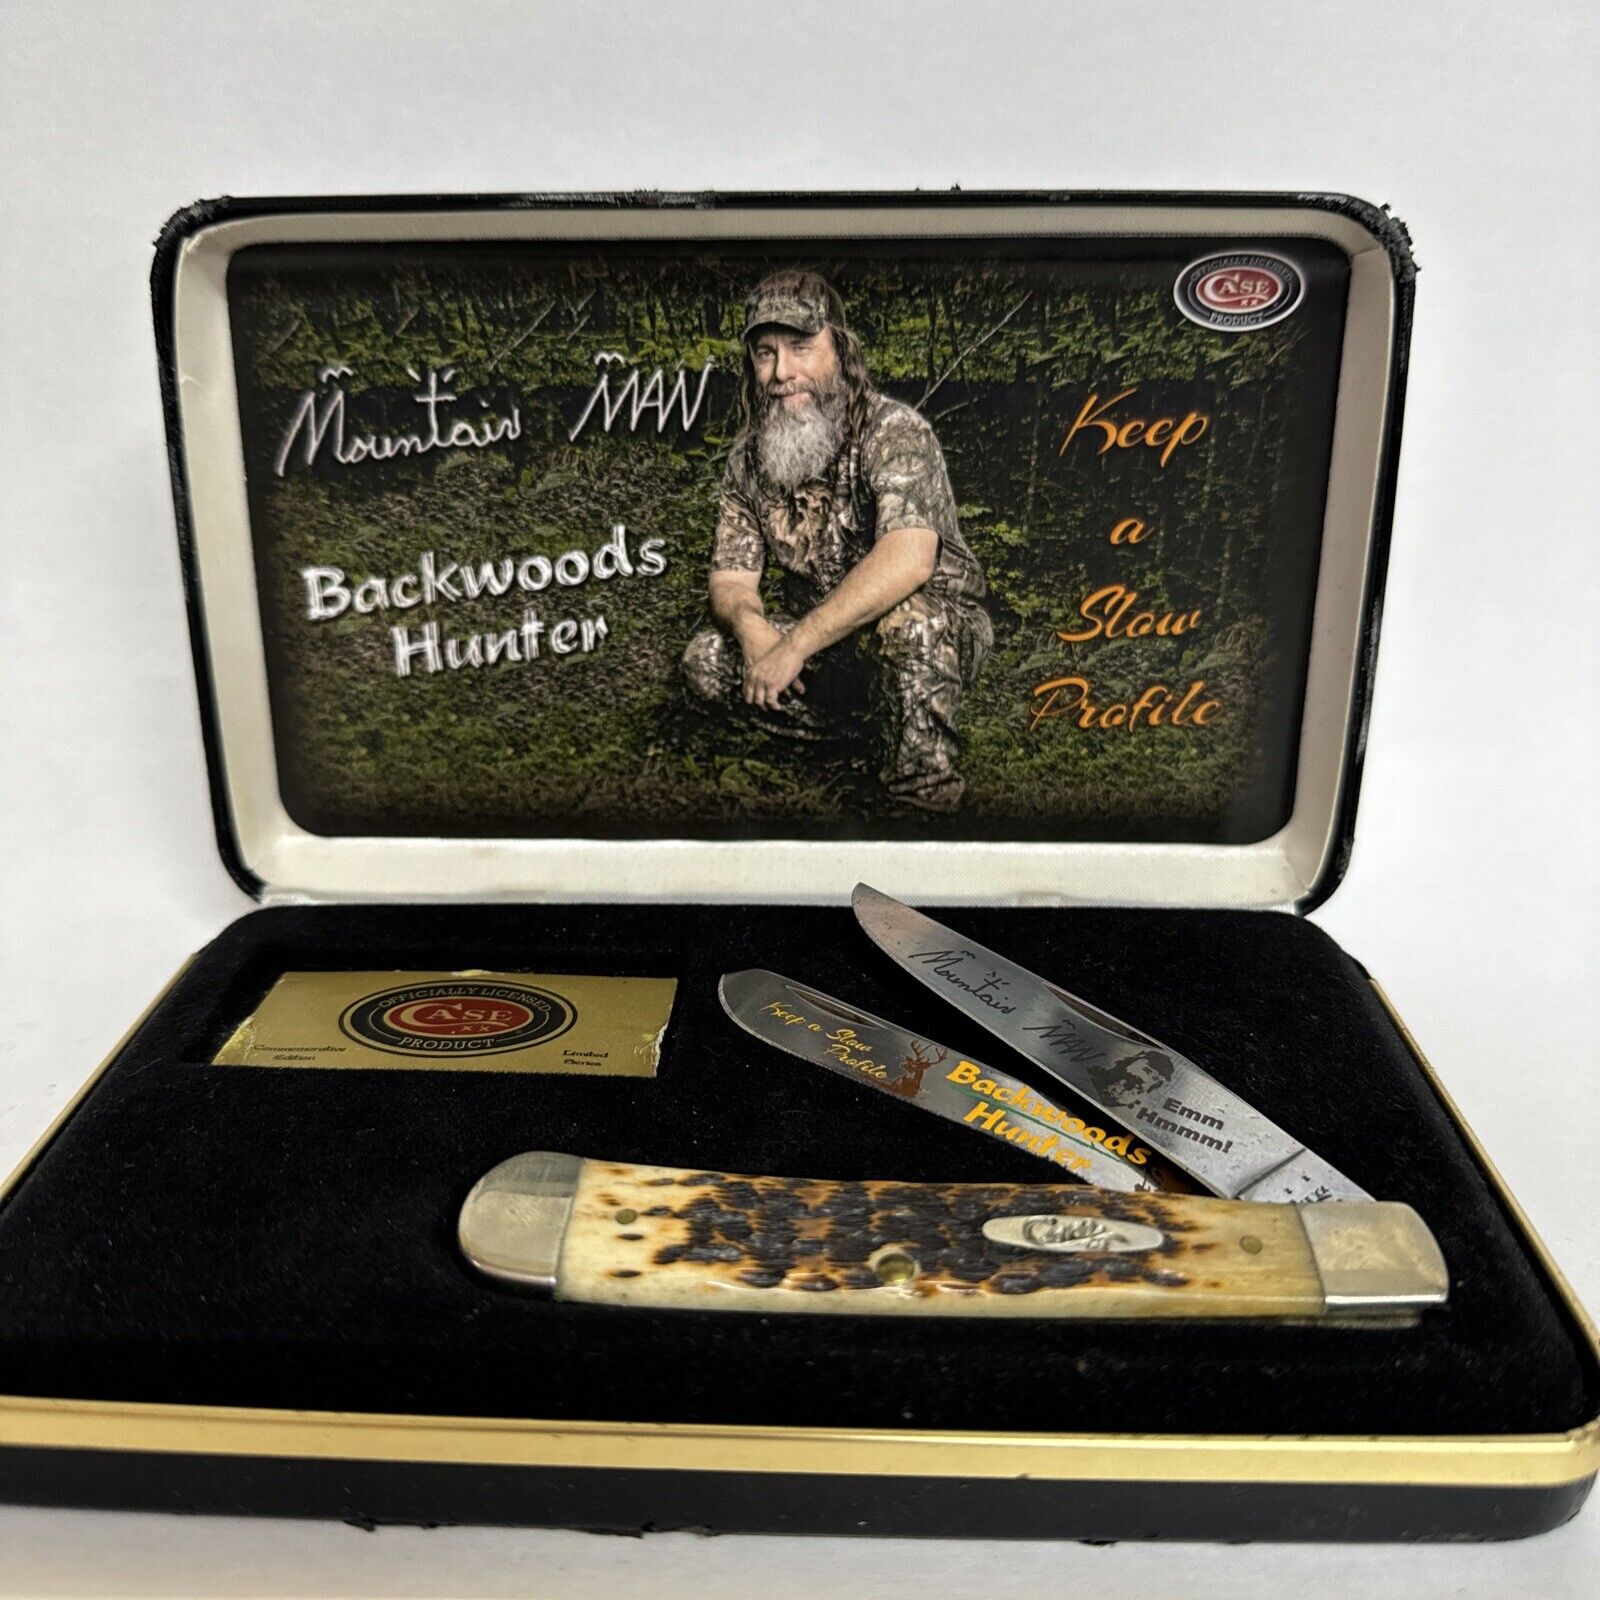 Casexx Backwoods Hunter Collector’s Knife “The Mountain Man”